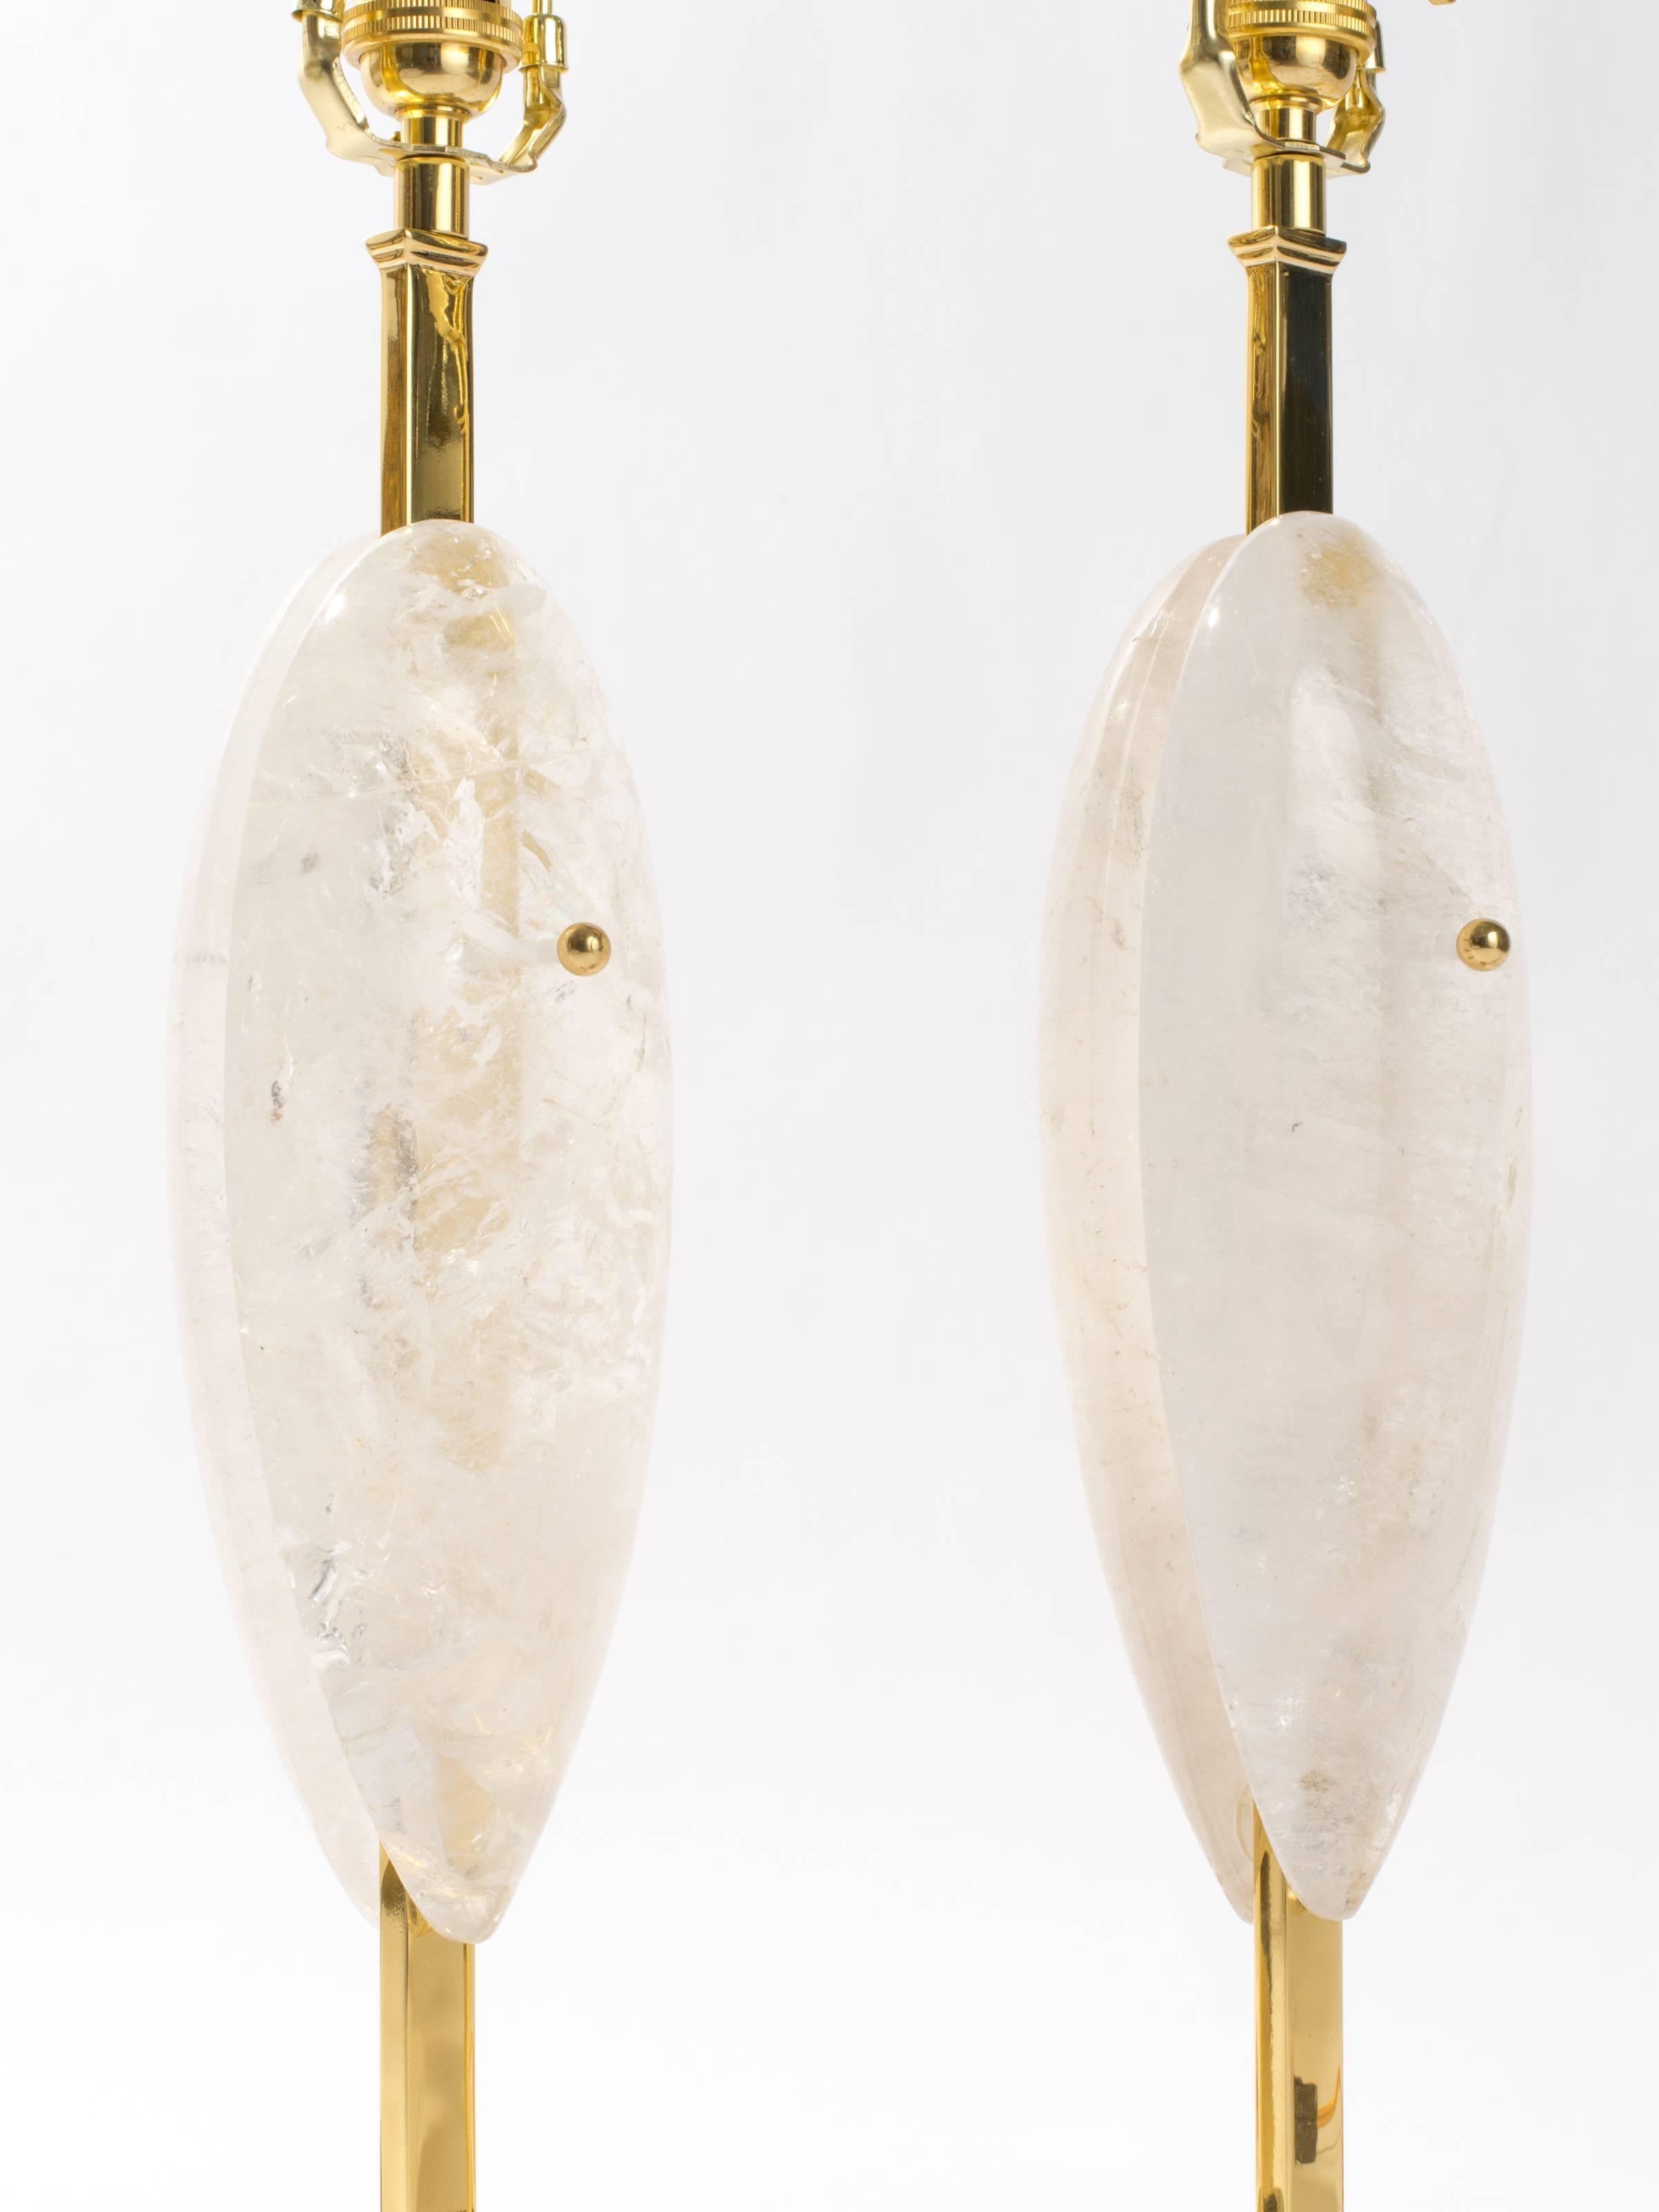 Hand-Crafted Pair of Rock Crystal Quartz Lamps, Eon Collection For Sale